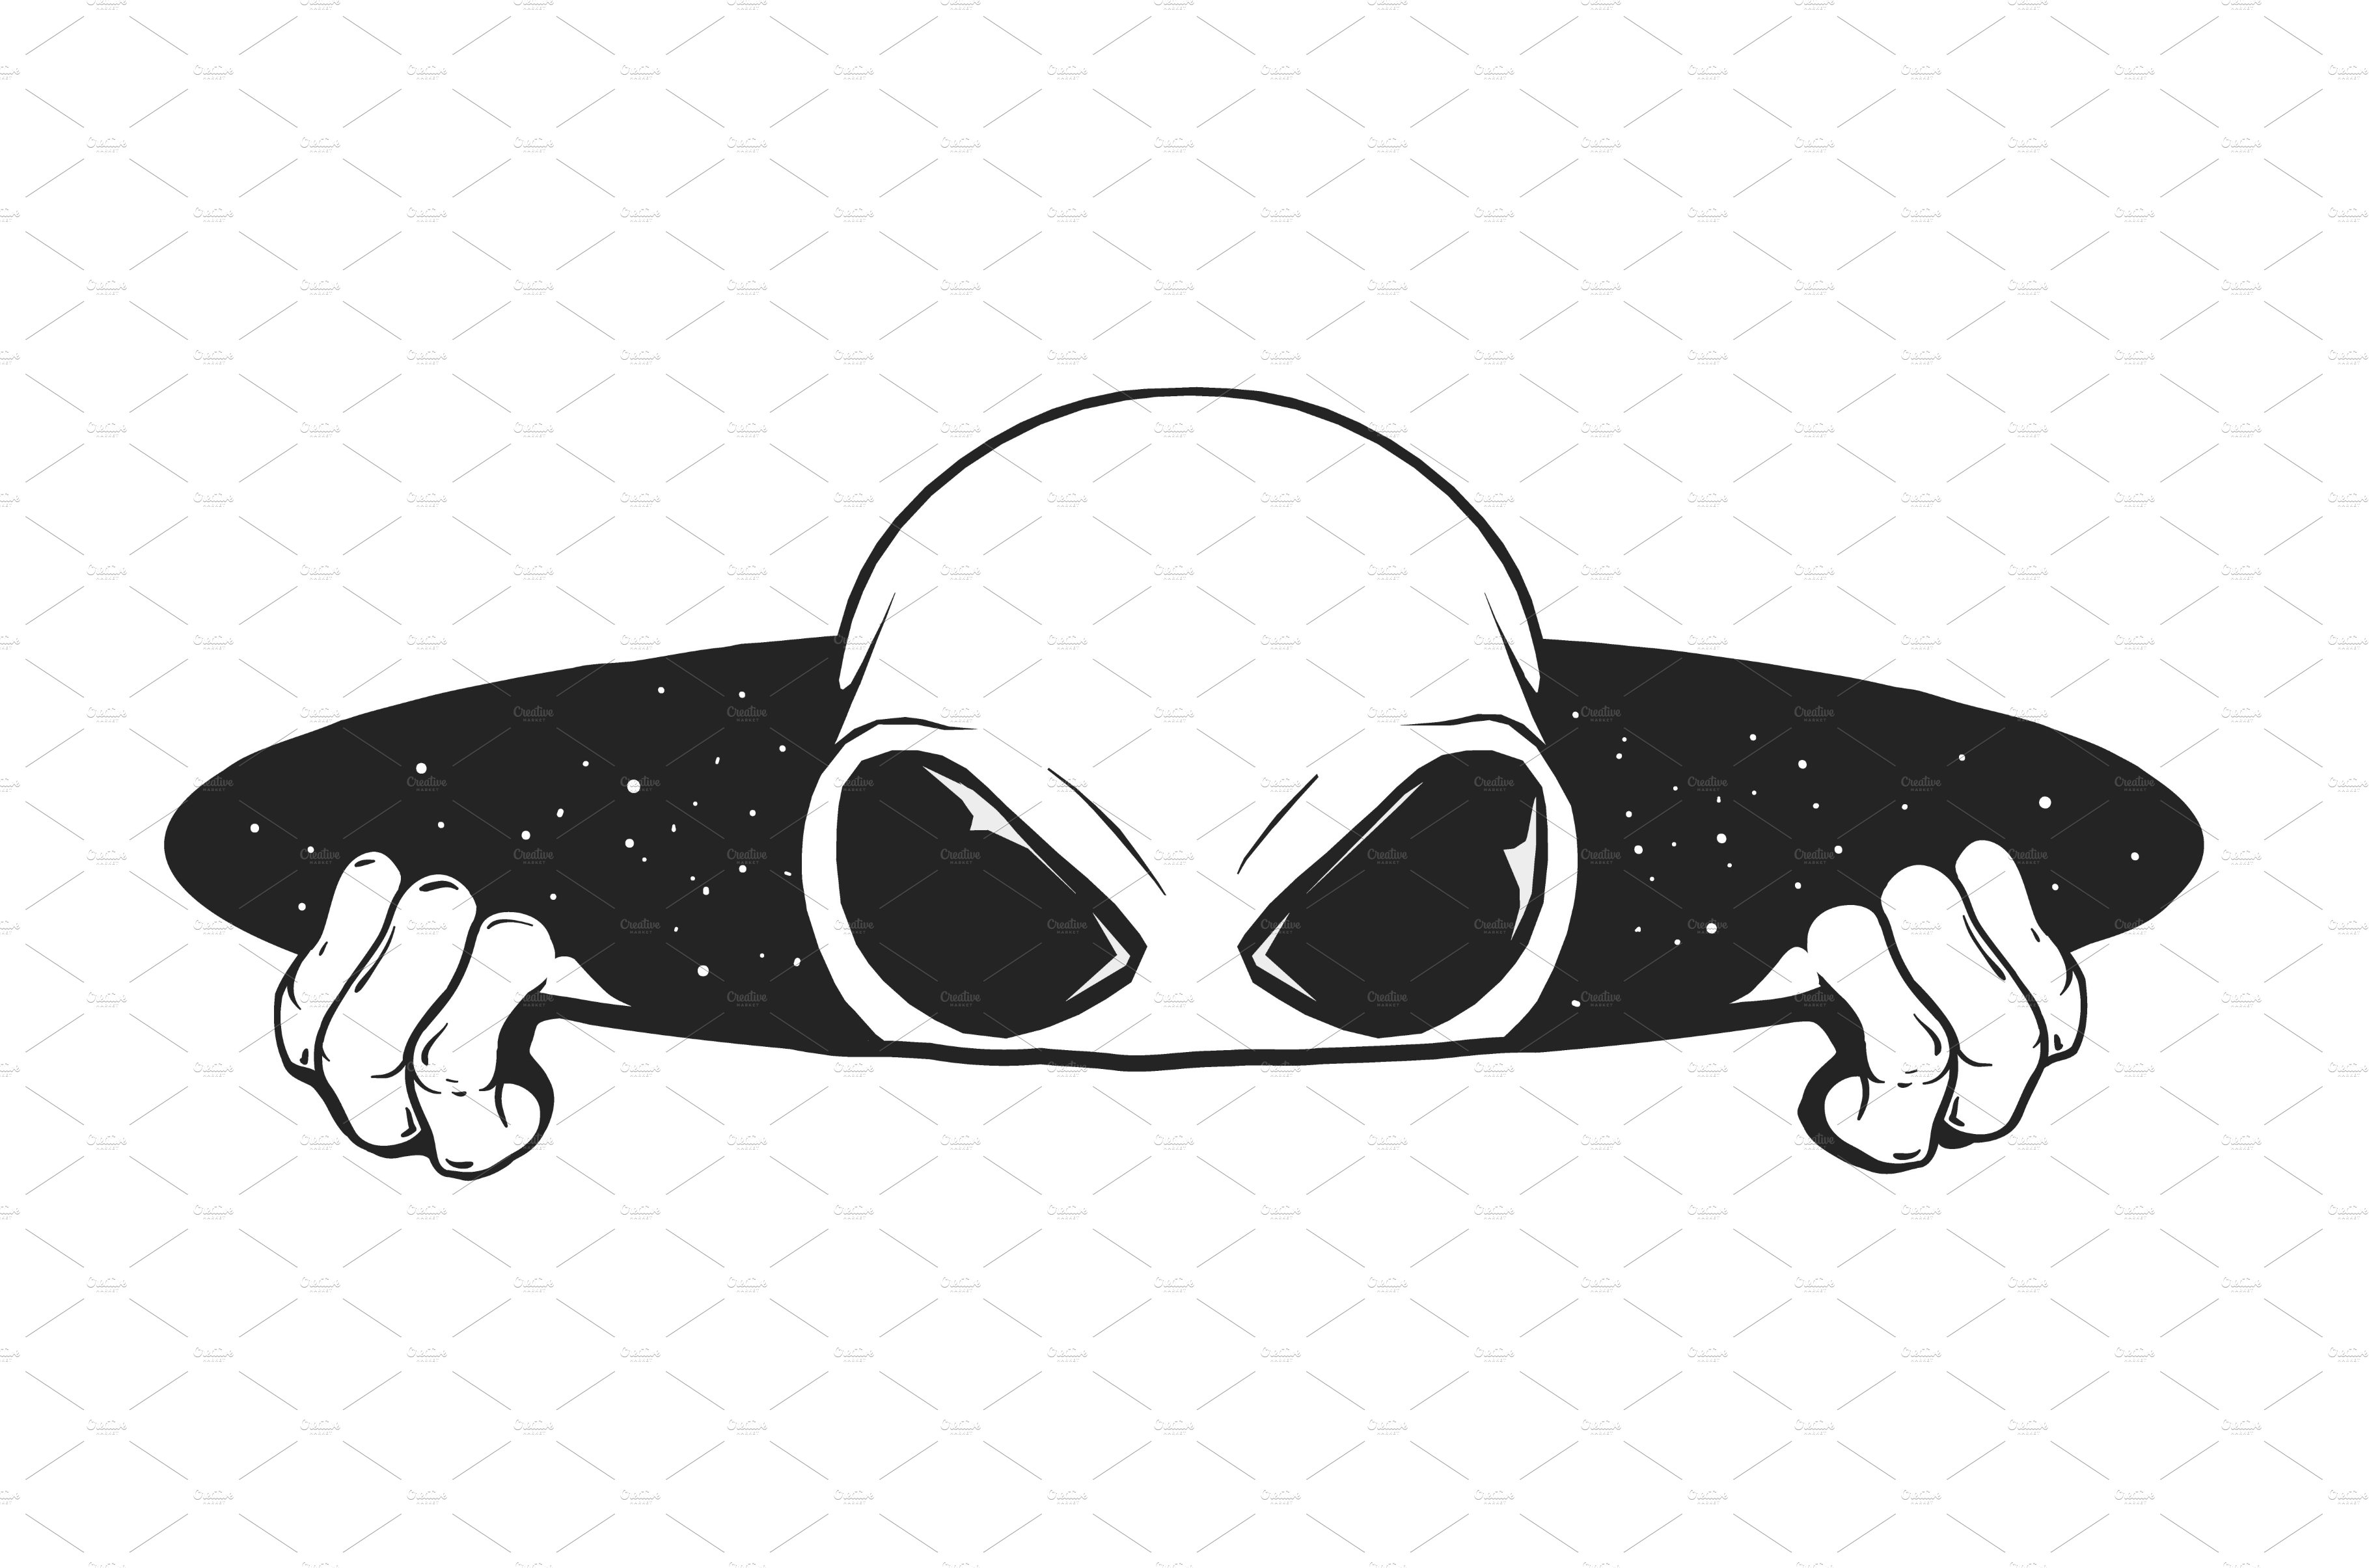 alien climbs out of a space hole cover image.